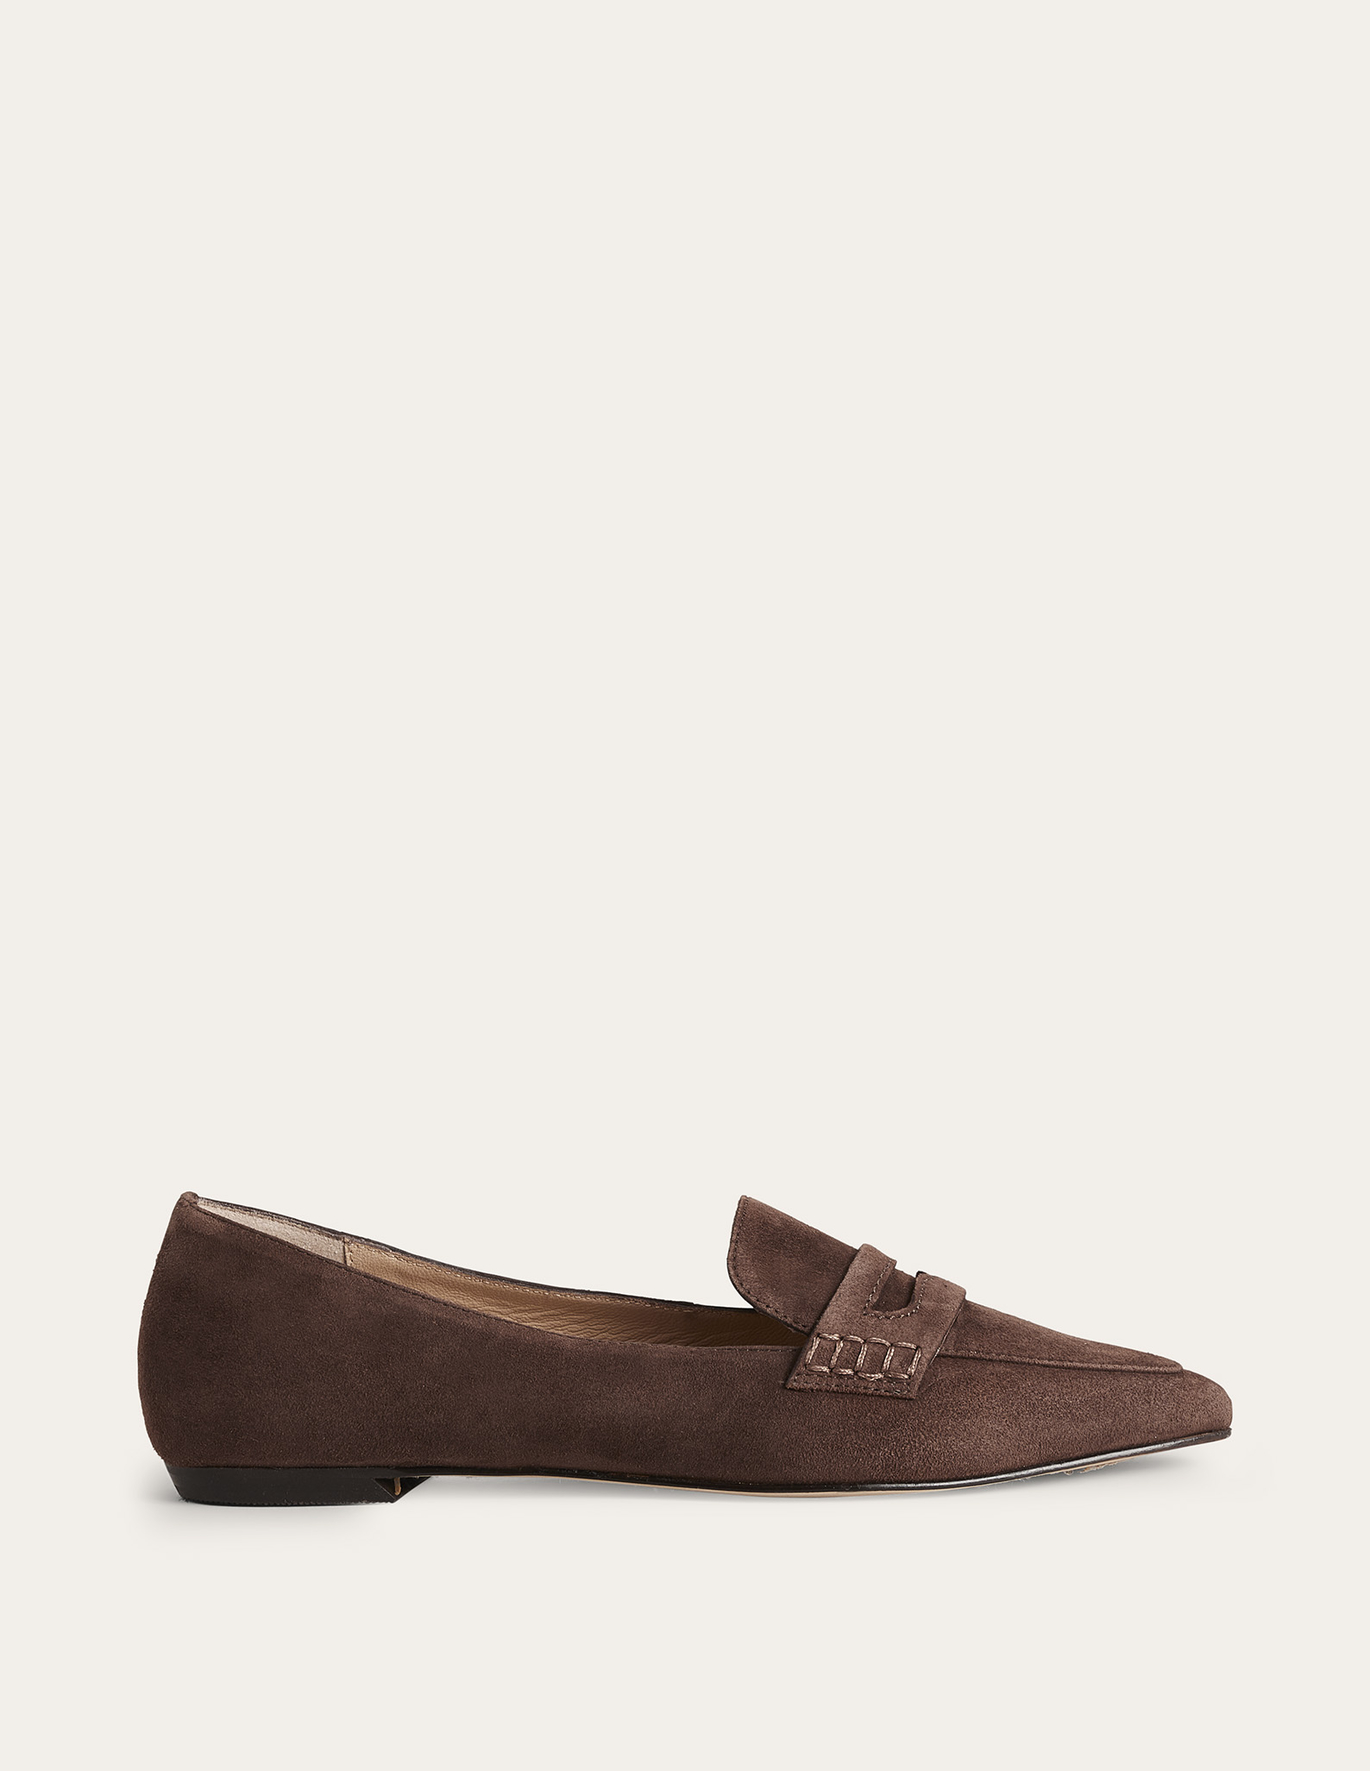 Boden Pointed Toe Penny Loafers - Chocolate Suede